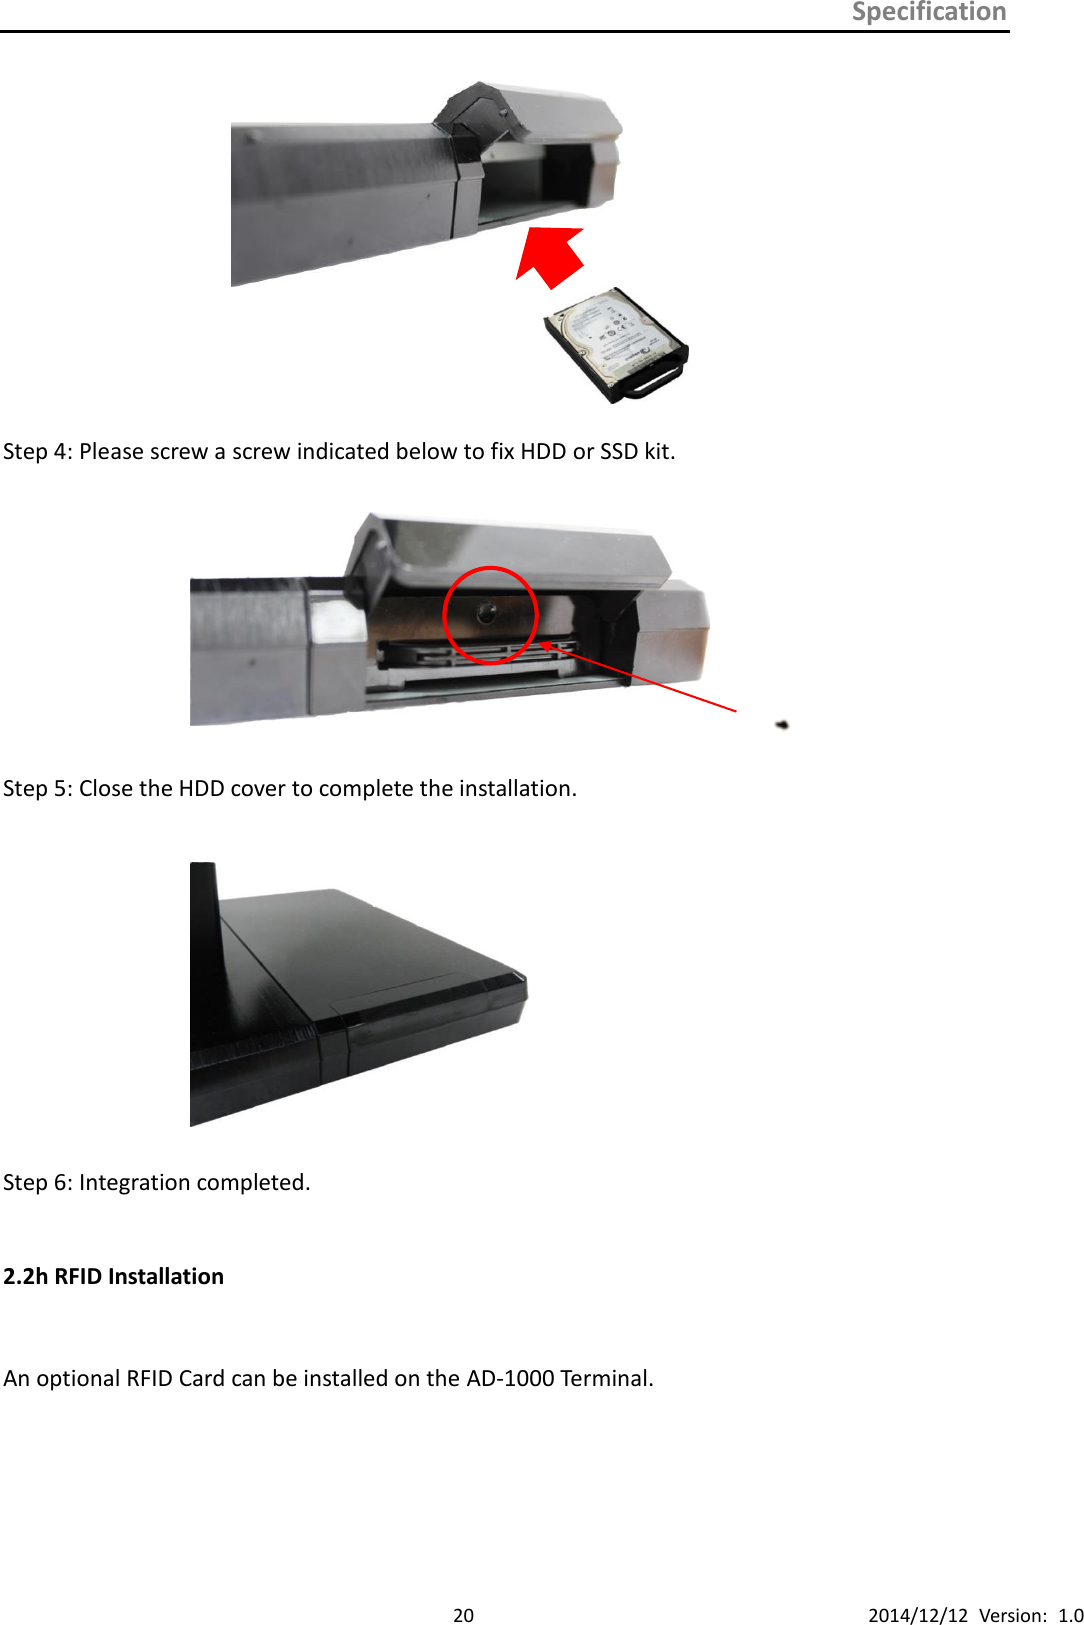 Specification      20 2014/12/12  Version:  1.0             Step 4: Please screw a screw indicated below to fix HDD or SSD kit.    Step 5: Close the HDD cover to complete the installation.   Step 6: Integration completed. 2.2h RFID Installation  An optional RFID Card can be installed on the AD-1000 Terminal.      